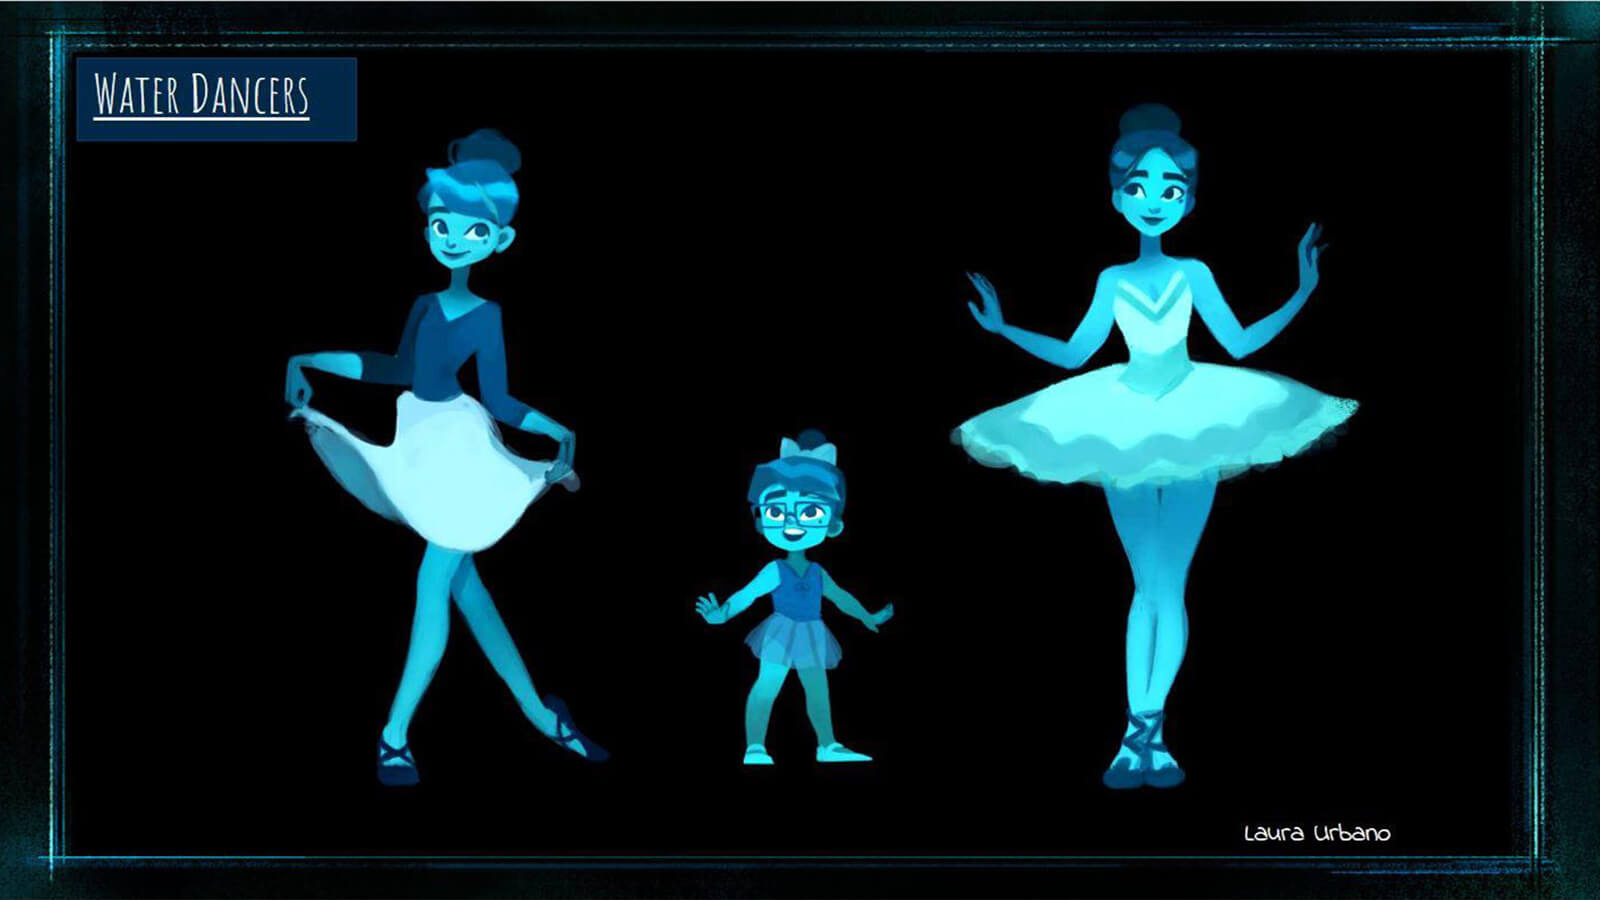 A concept illustration of the film's "Water Dancer" characters.